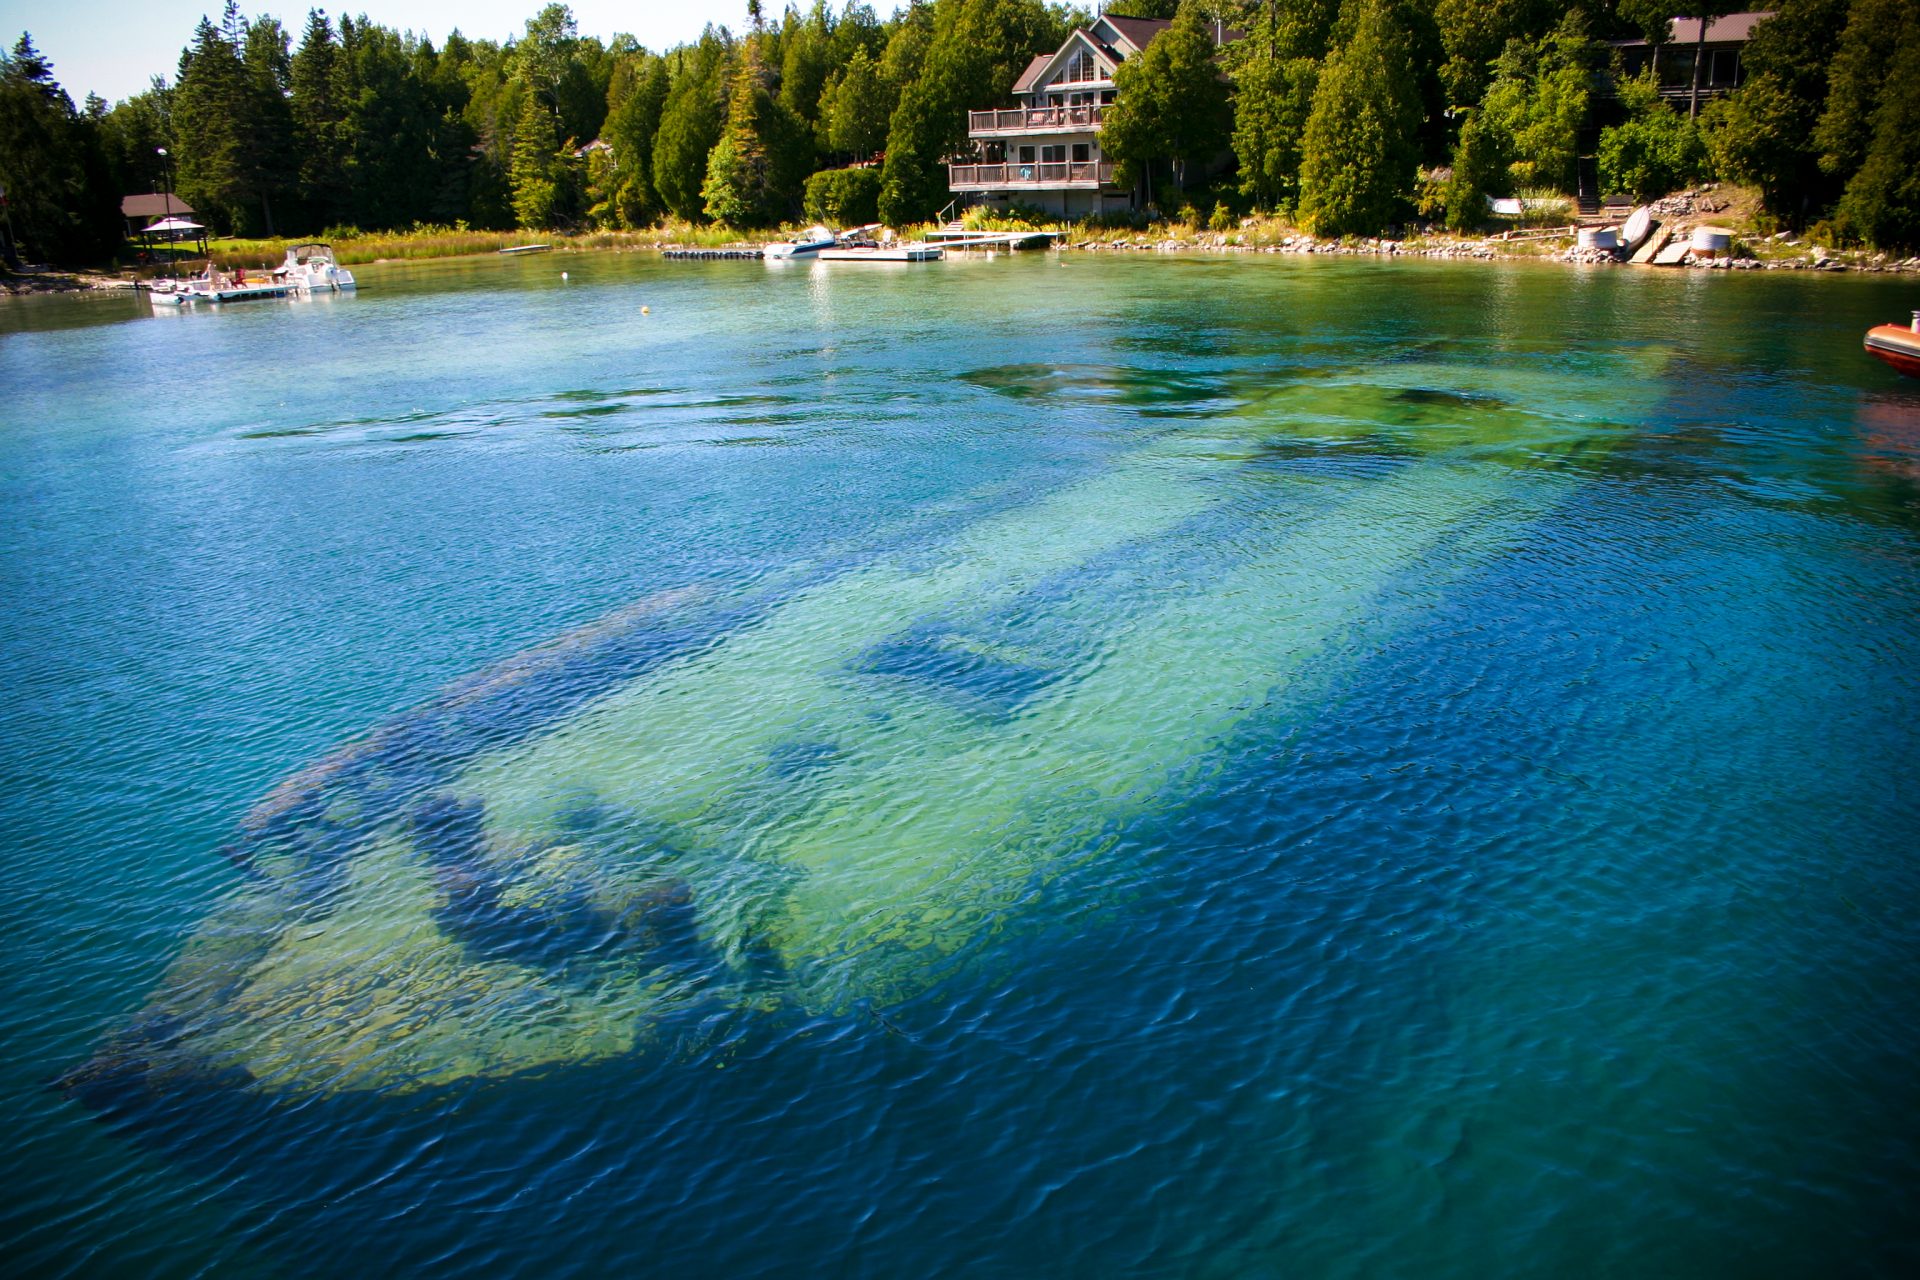 Shipwreck in Tobermory, in the Bruce Peninsula, which is one of our bucket list destinations in Canada.